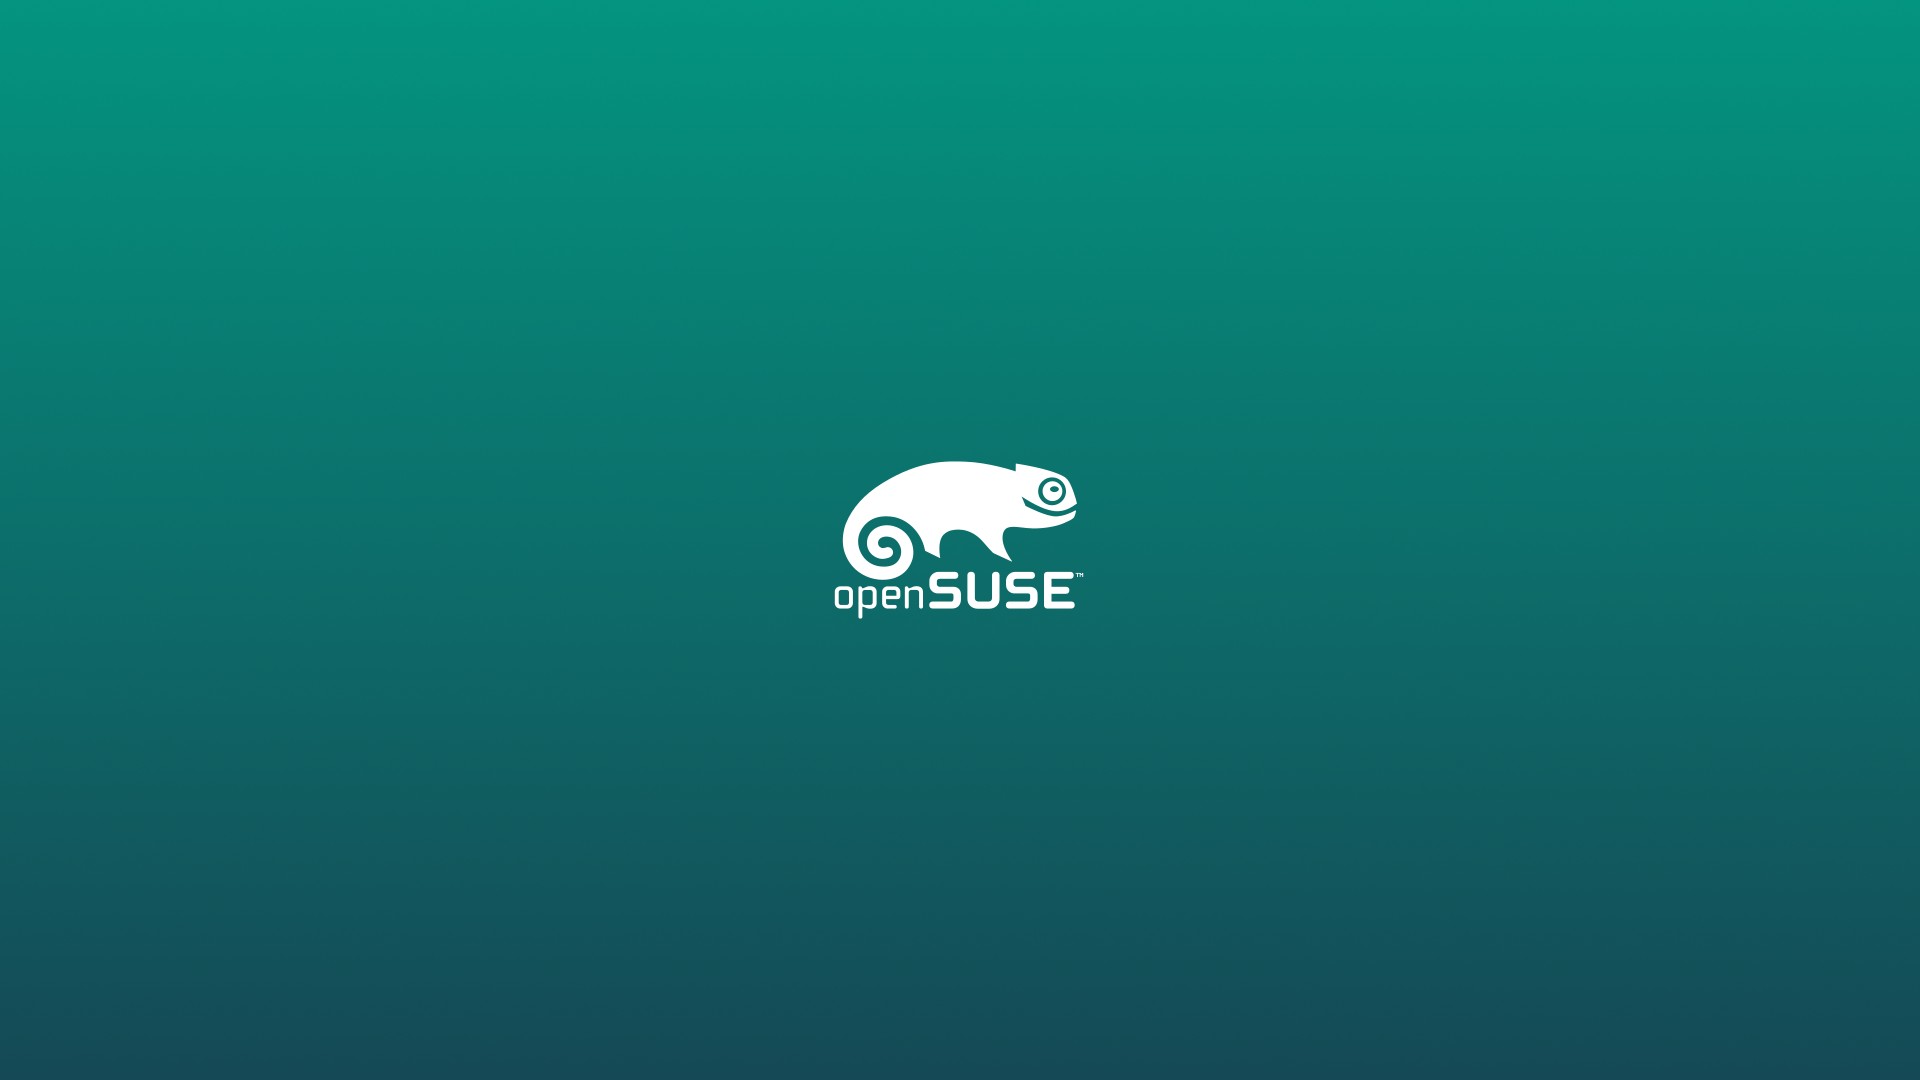 openSUSE, Linux, OpenSUSE Leap, Gecko Wallpaper